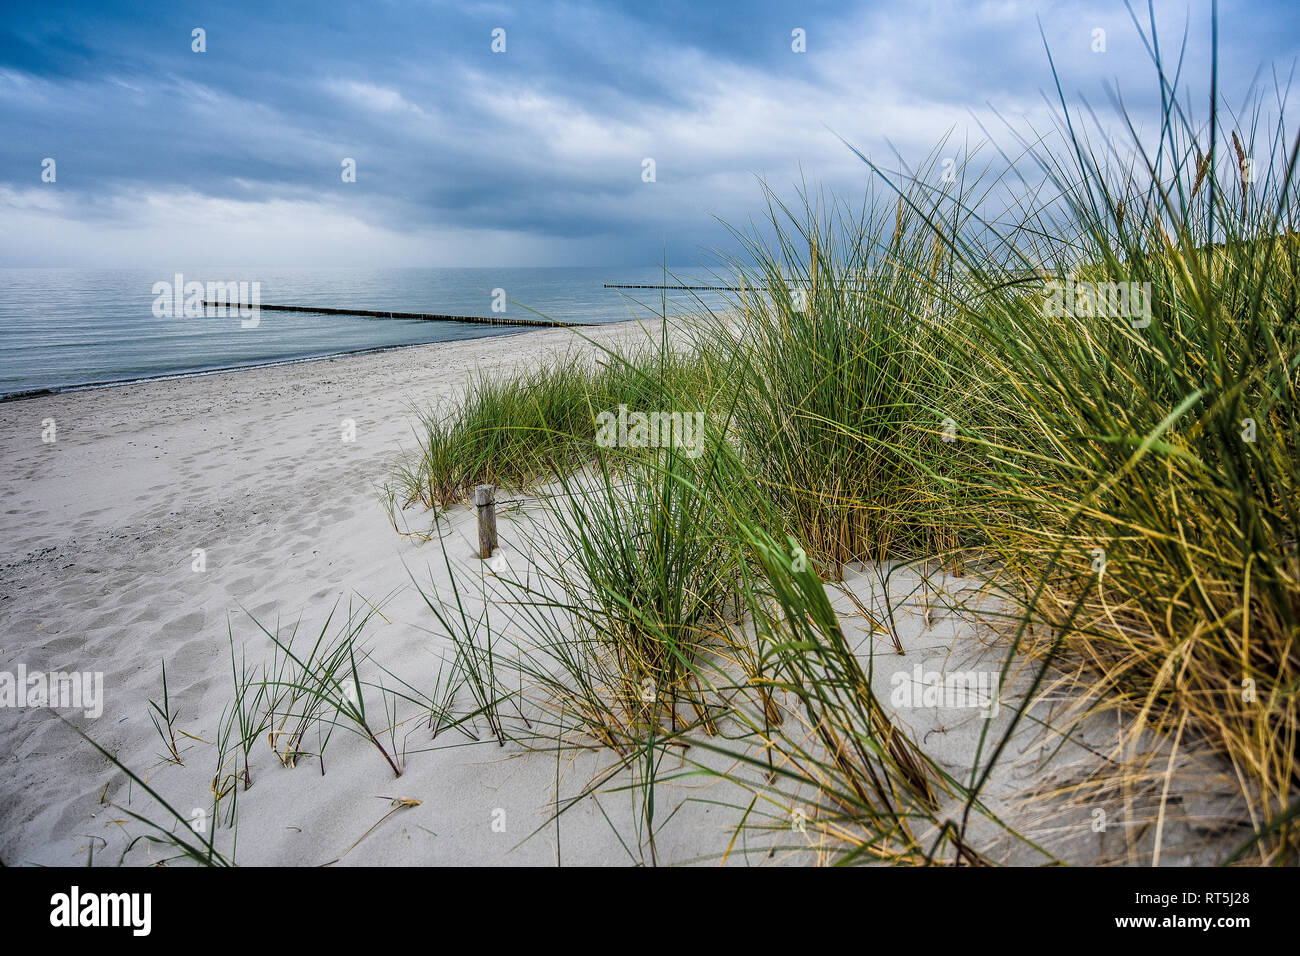 Germany, Mecklenburg-Western Pomerania, Zingst, beach and clouds Stock Photo